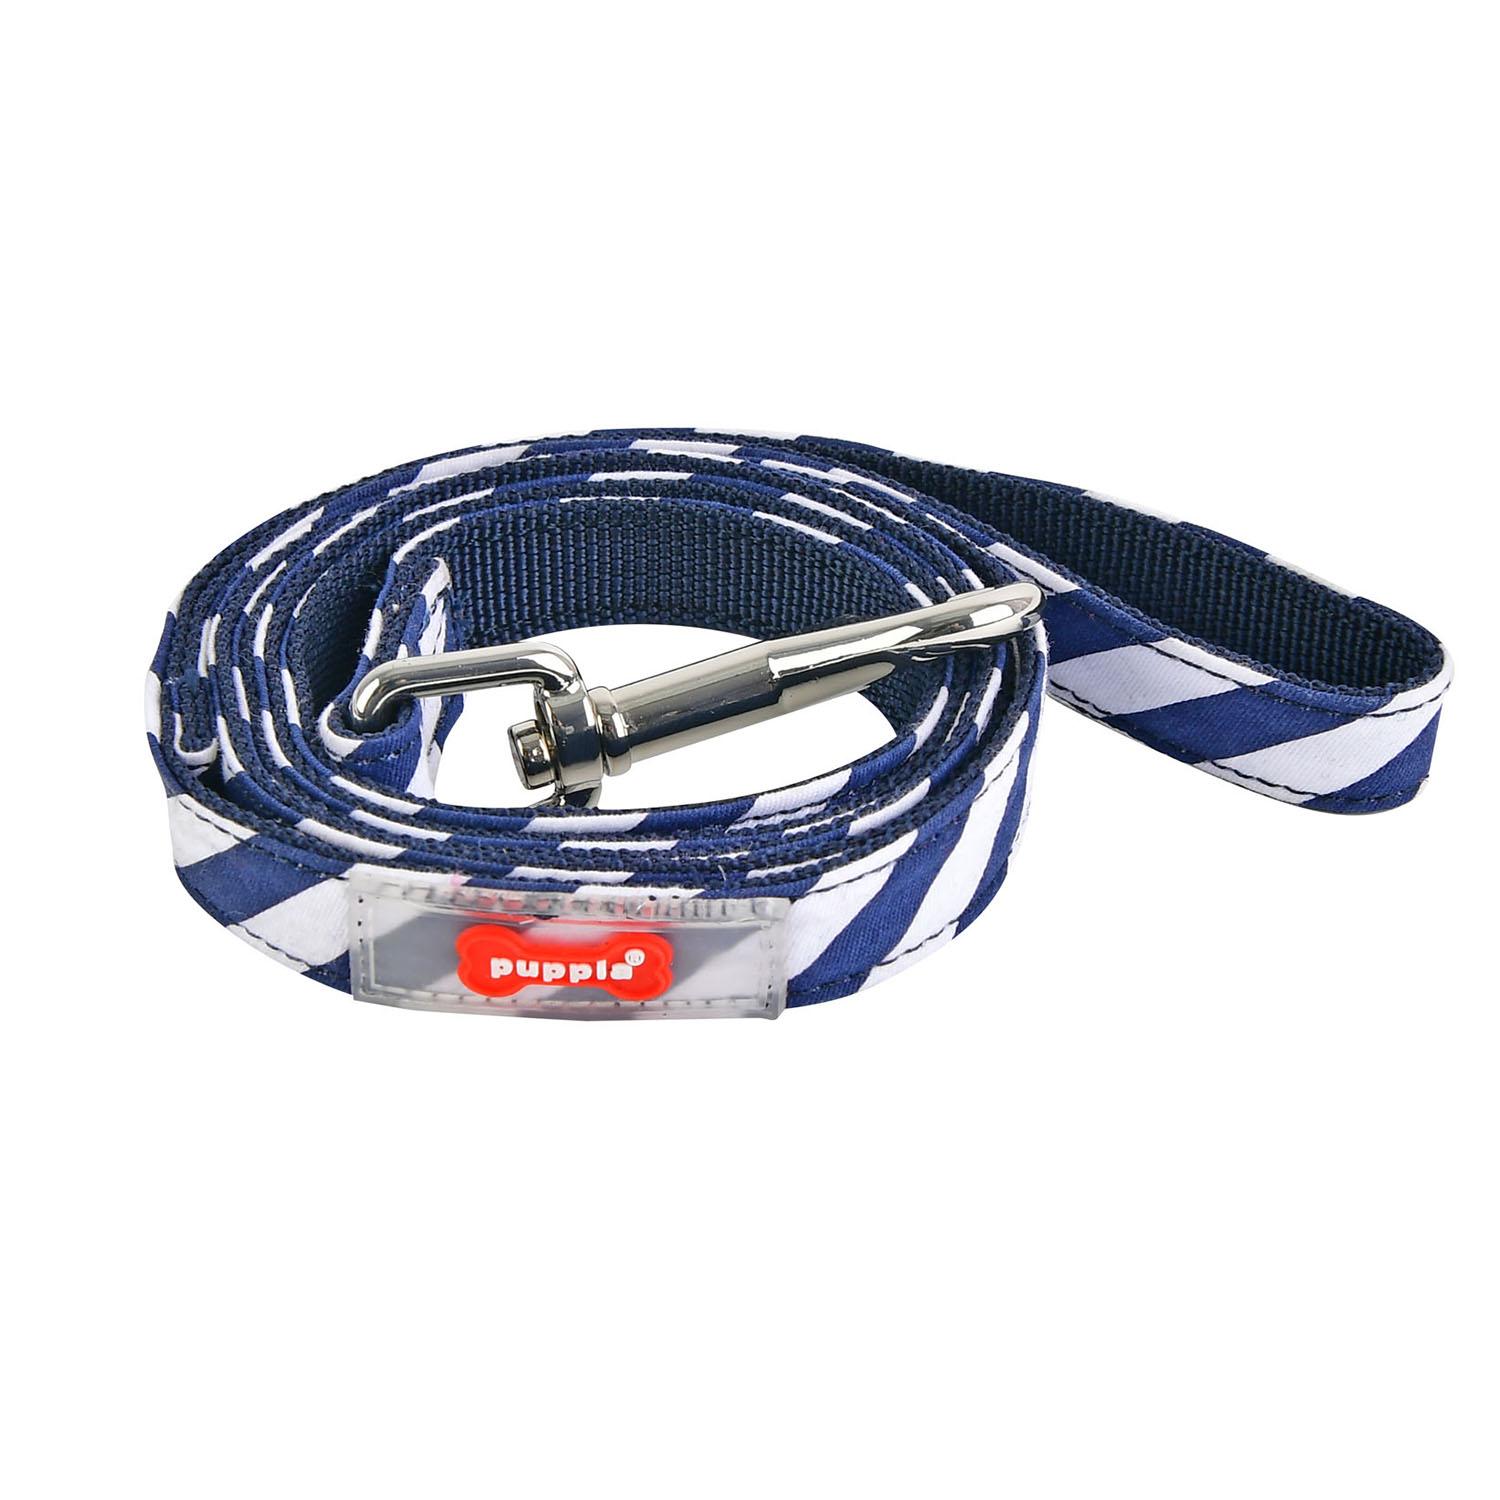 Sport Dog Leash by Puppia - Navy